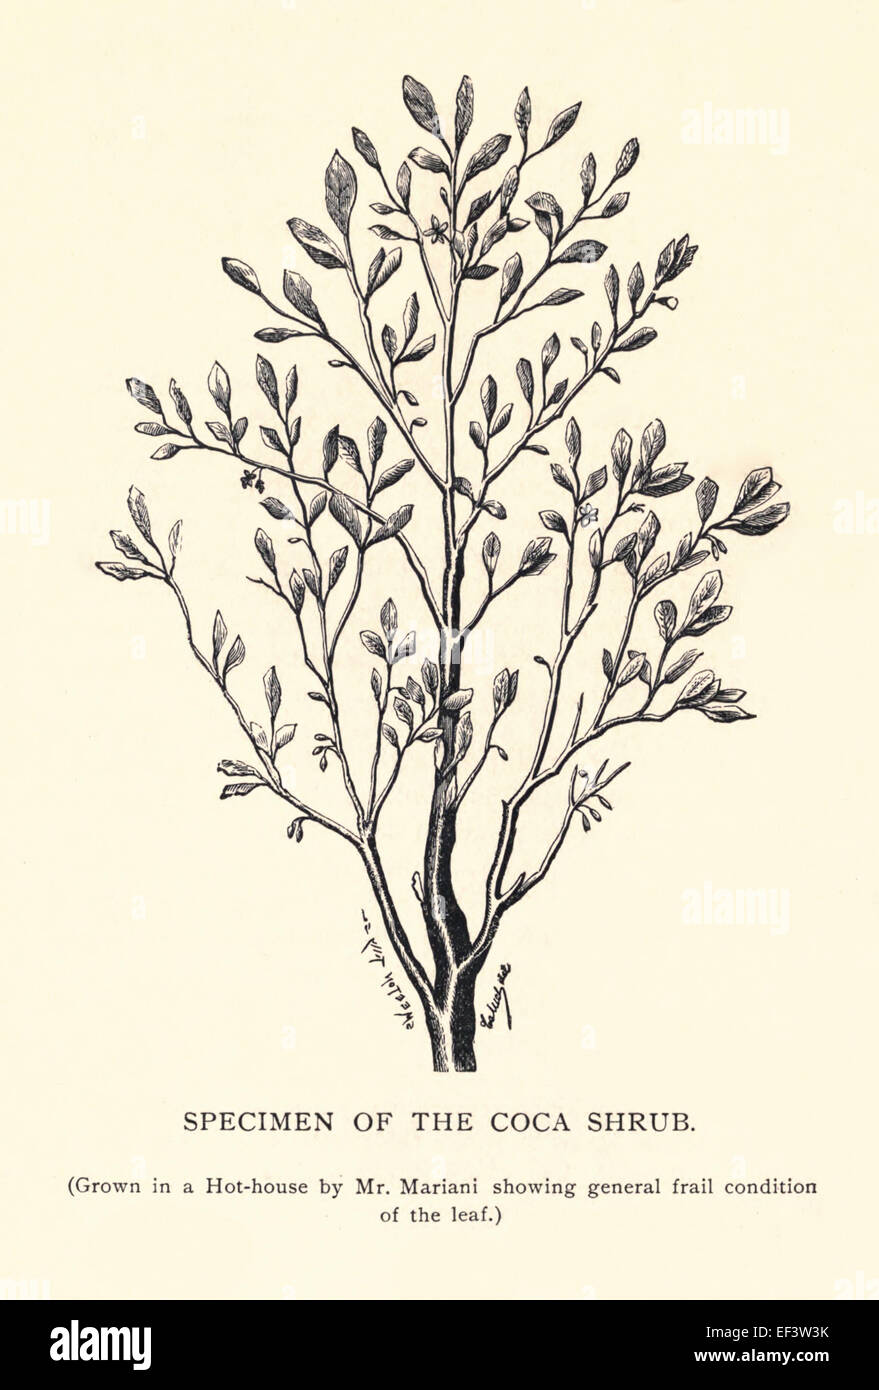 Specimen of a Coca Shrub (Grown in a Hot-house by Mr. Mariani showing general frail condition of the leaf.) Angelo Mariani (1838-1914) was a French Chemist who produced the first Coca Wine, 'Vin Mariani' in 1863. See description for more information. Stock Photo